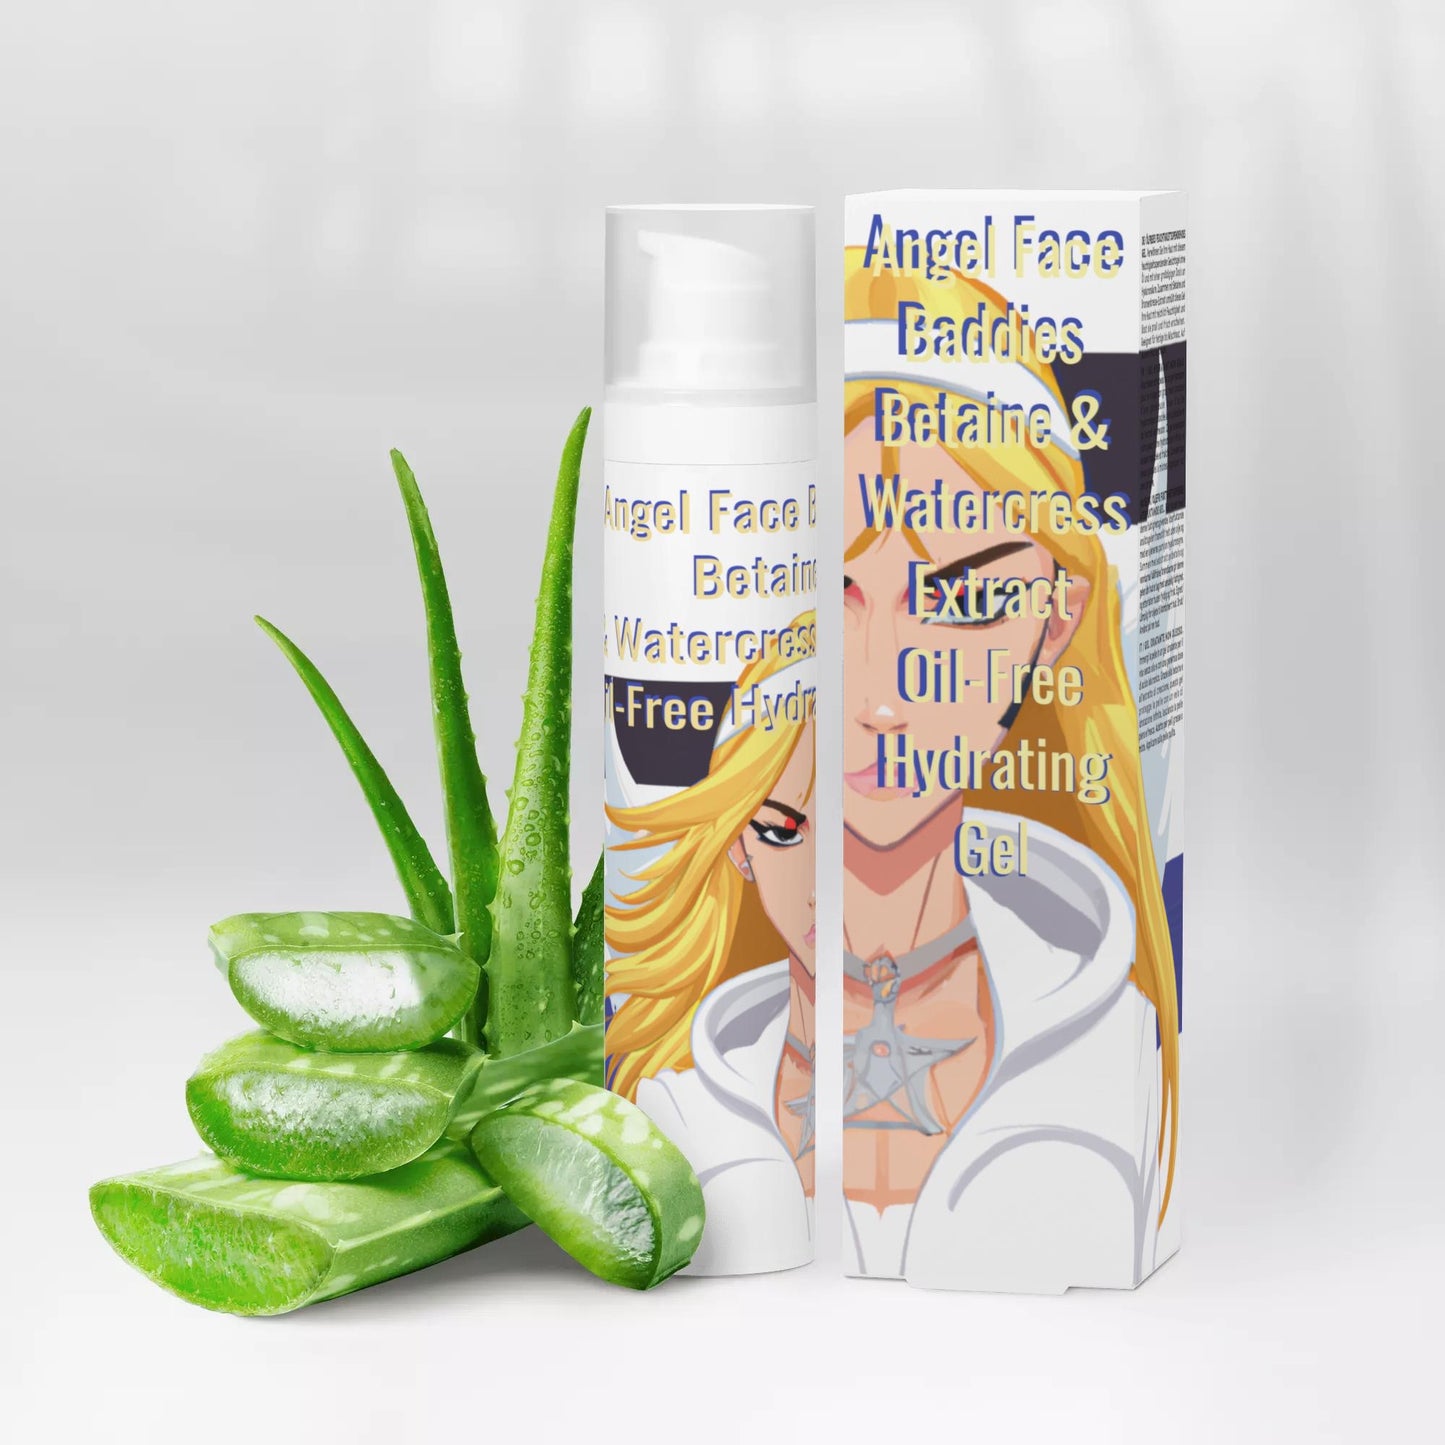 Betaine and Watercress Oil-Free Hydrating Gel by Angelface Baddies